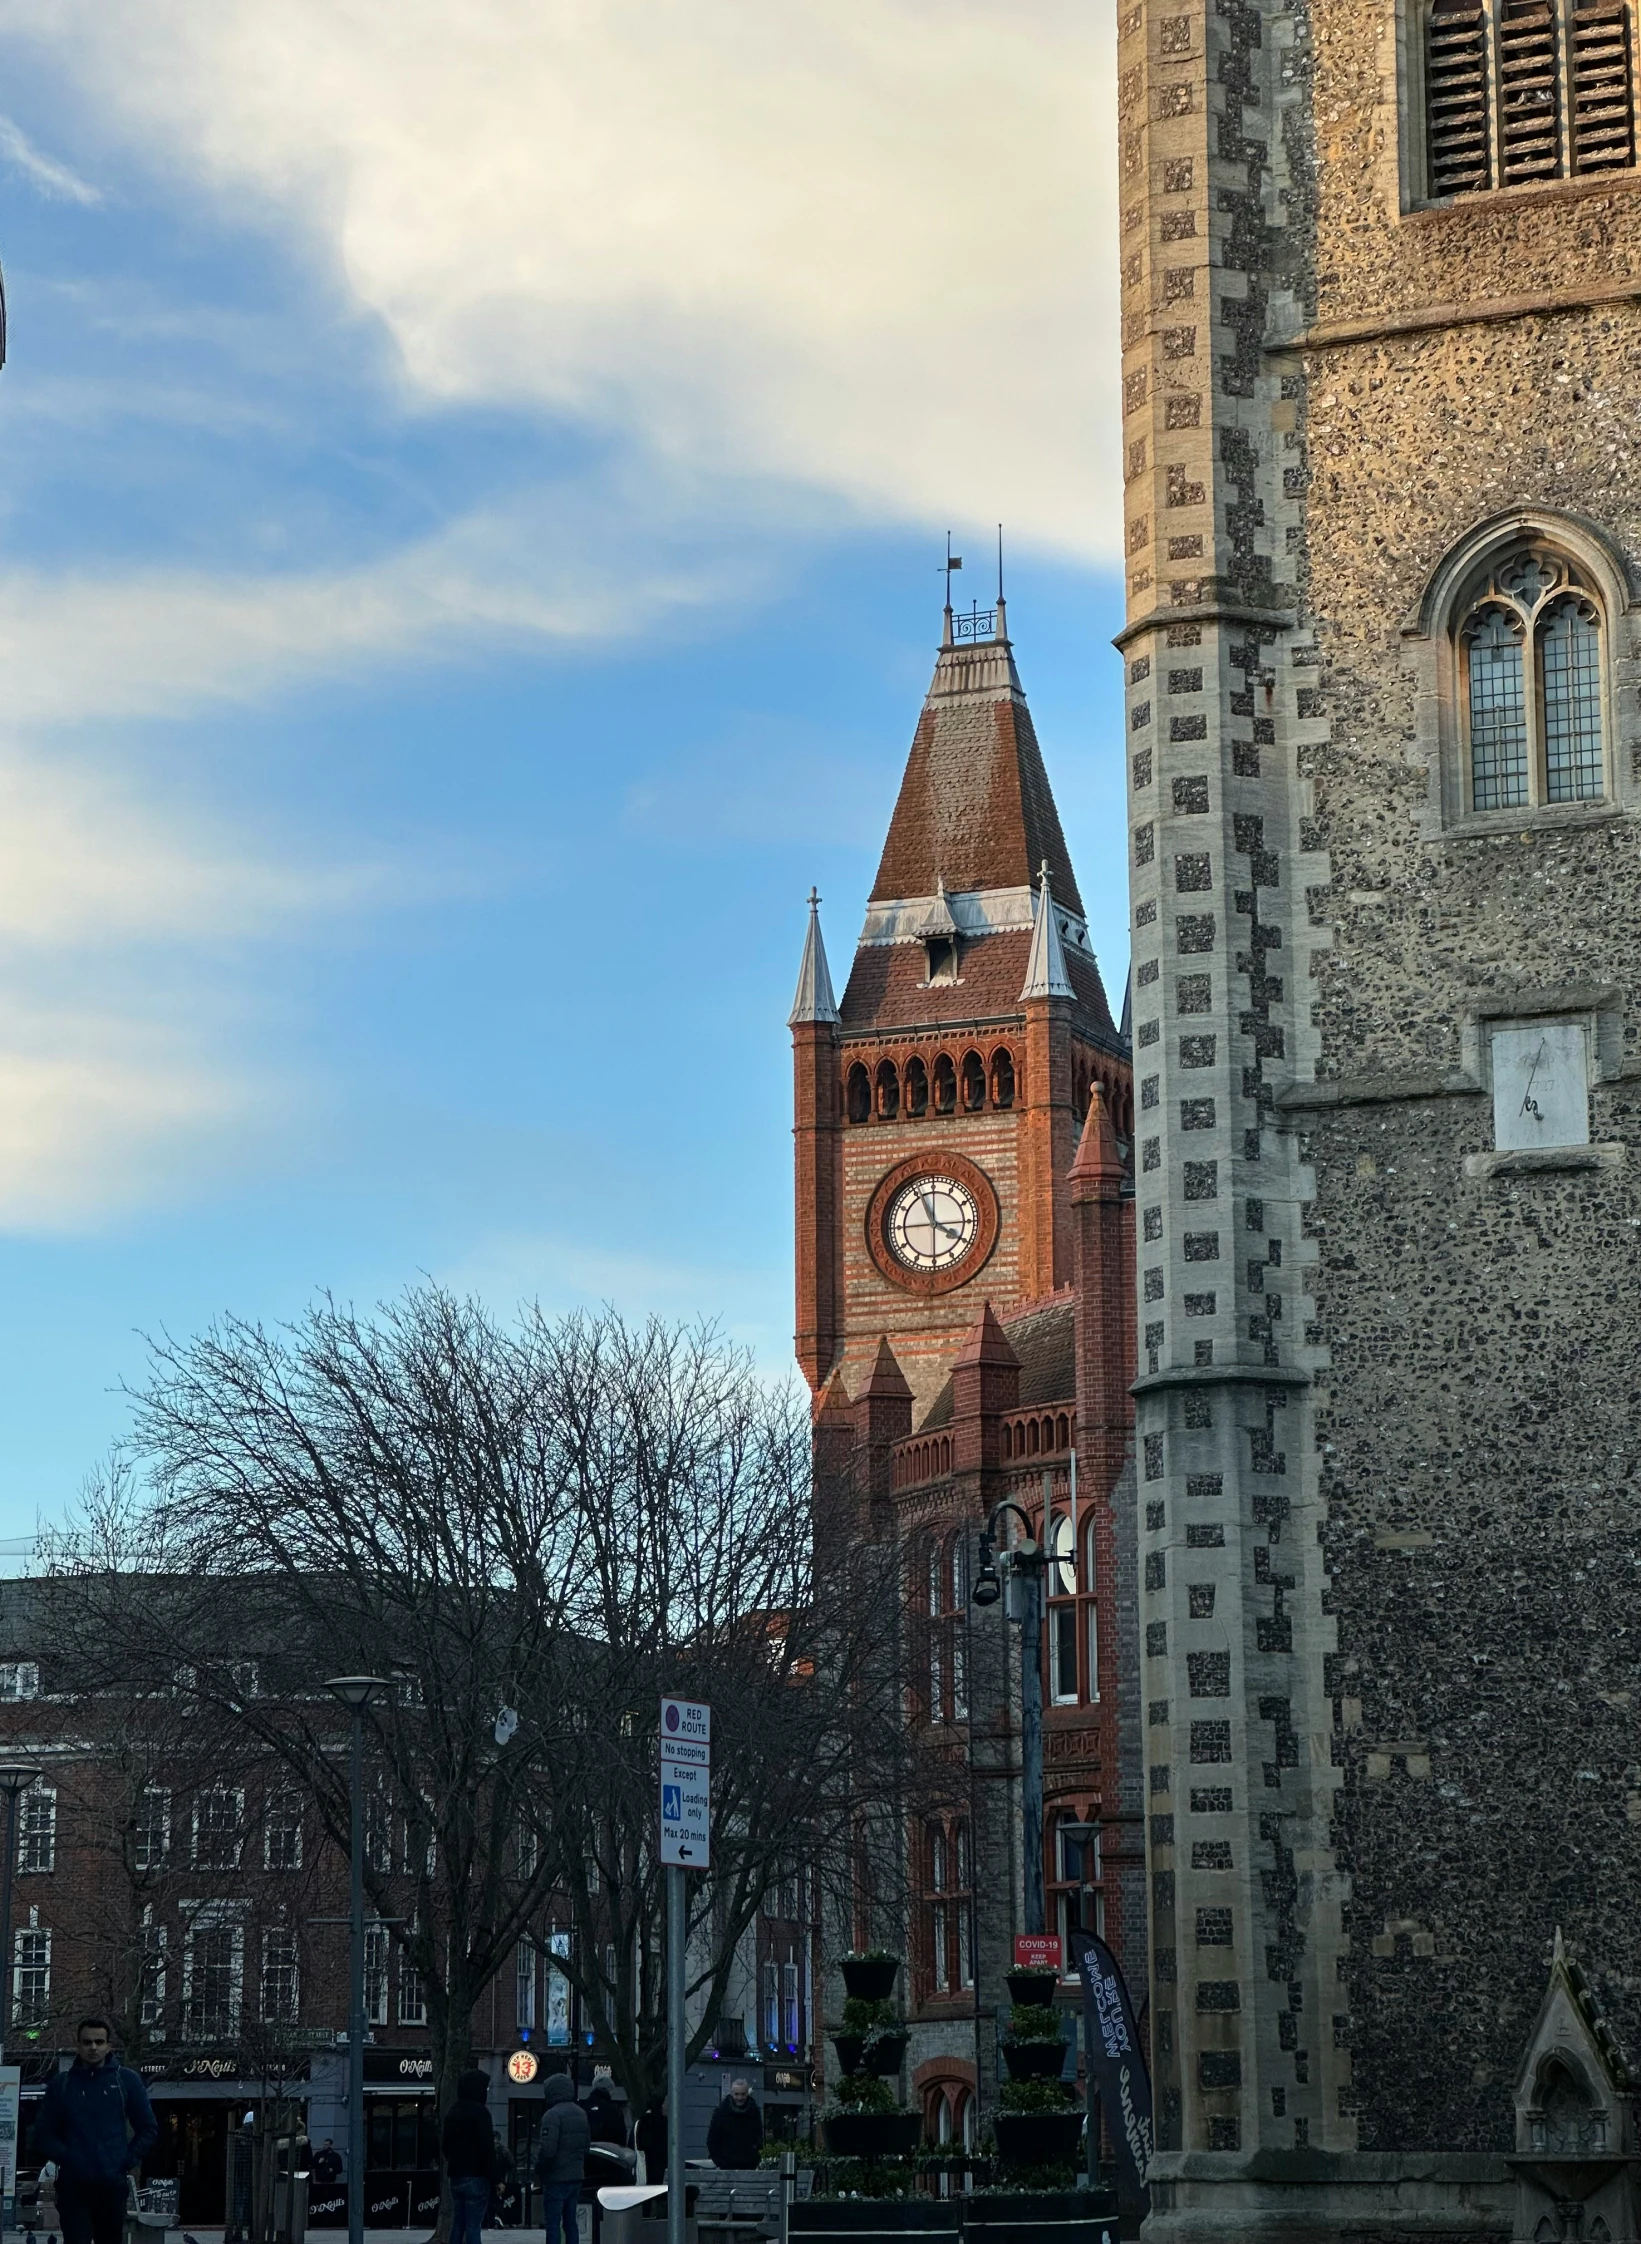 an old building is next to another tall clock tower